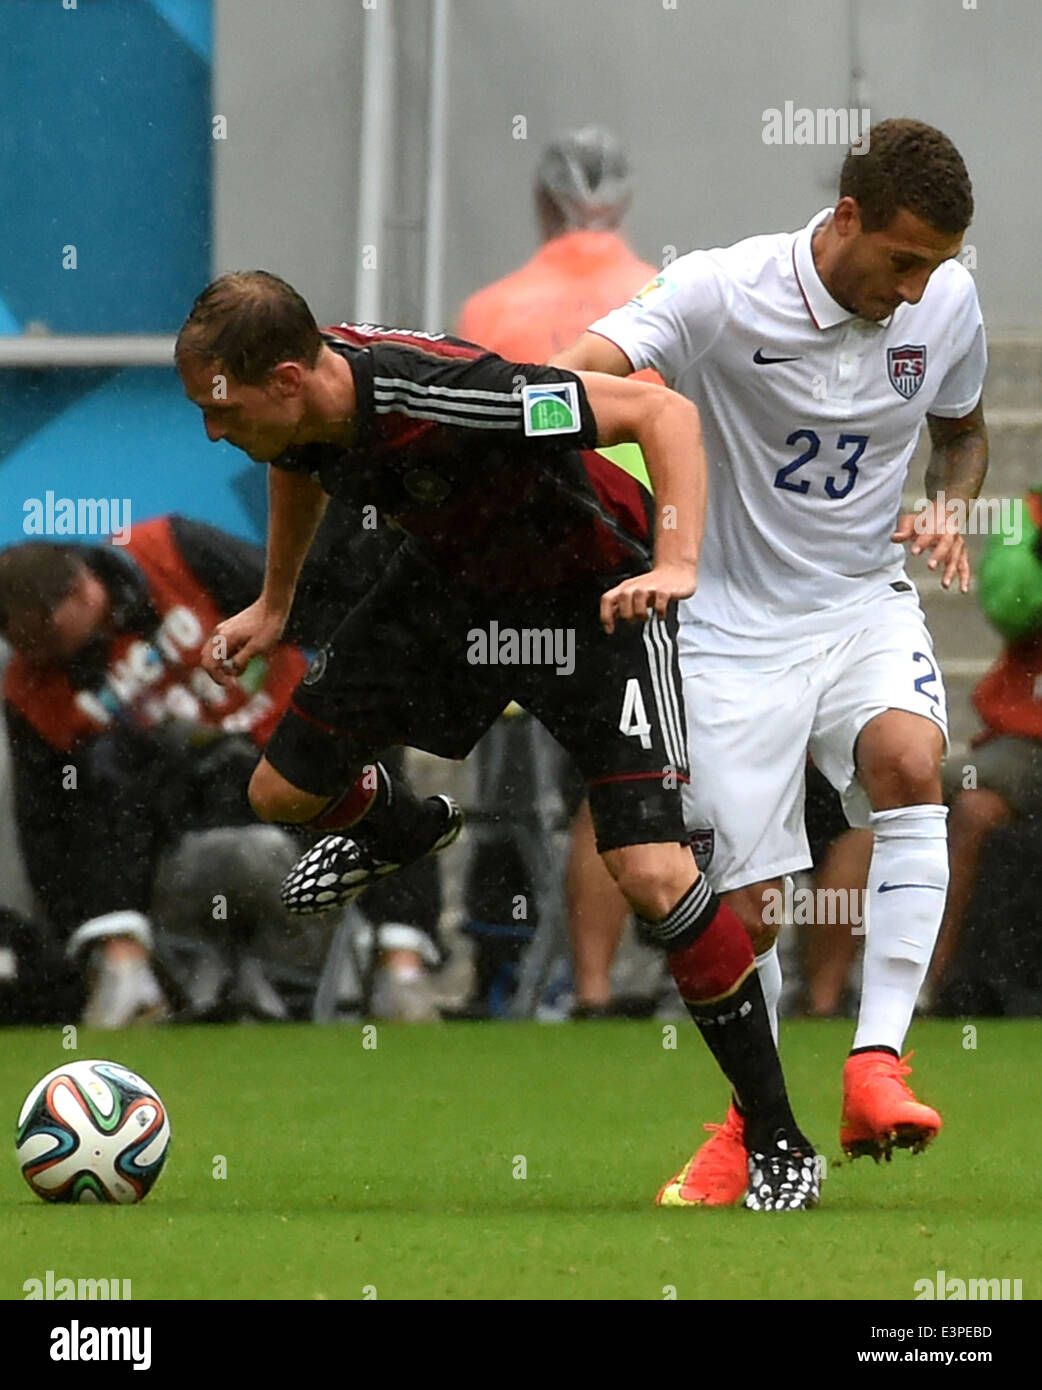 Recife, Brazil. 26th June, 2014. Germany's Benedikt Howedes (L) vies with Fabian Johnson of the U.S. during a Group G match between the U.S. and Germany of 2014 FIFA World Cup at the Arena Pernambuco Stadium in Recife, Brazil, on June 26, 2014. Credit:  Guo Yong/Xinhua/Alamy Live News Stock Photo